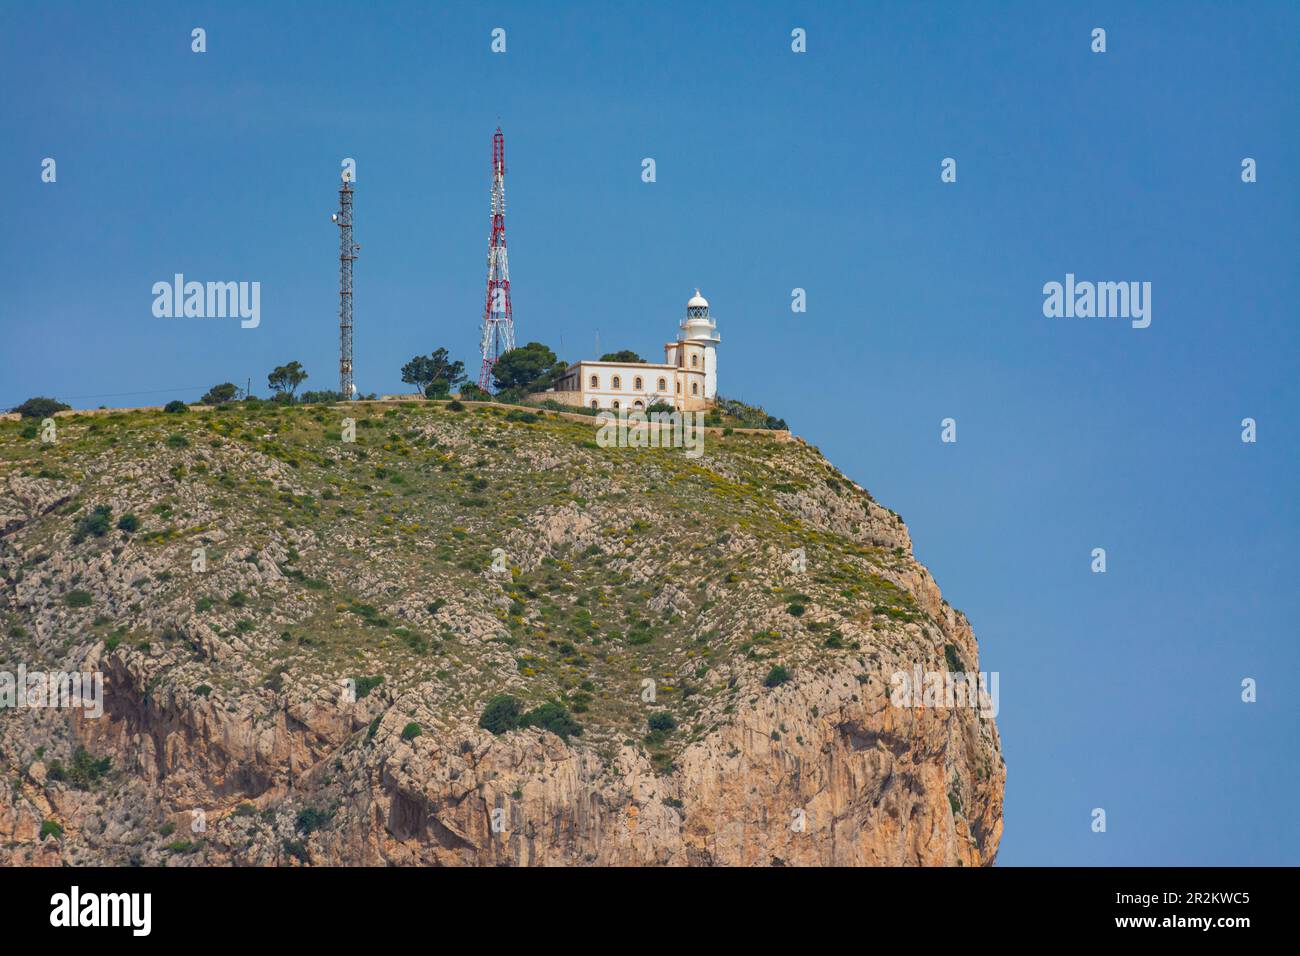 Lighthouse of Cabo de San Antonio, in Jávea, in the Montgo natural park. Small lighthouse on top of the cliff. From the sea aboard a boat Stock Photo